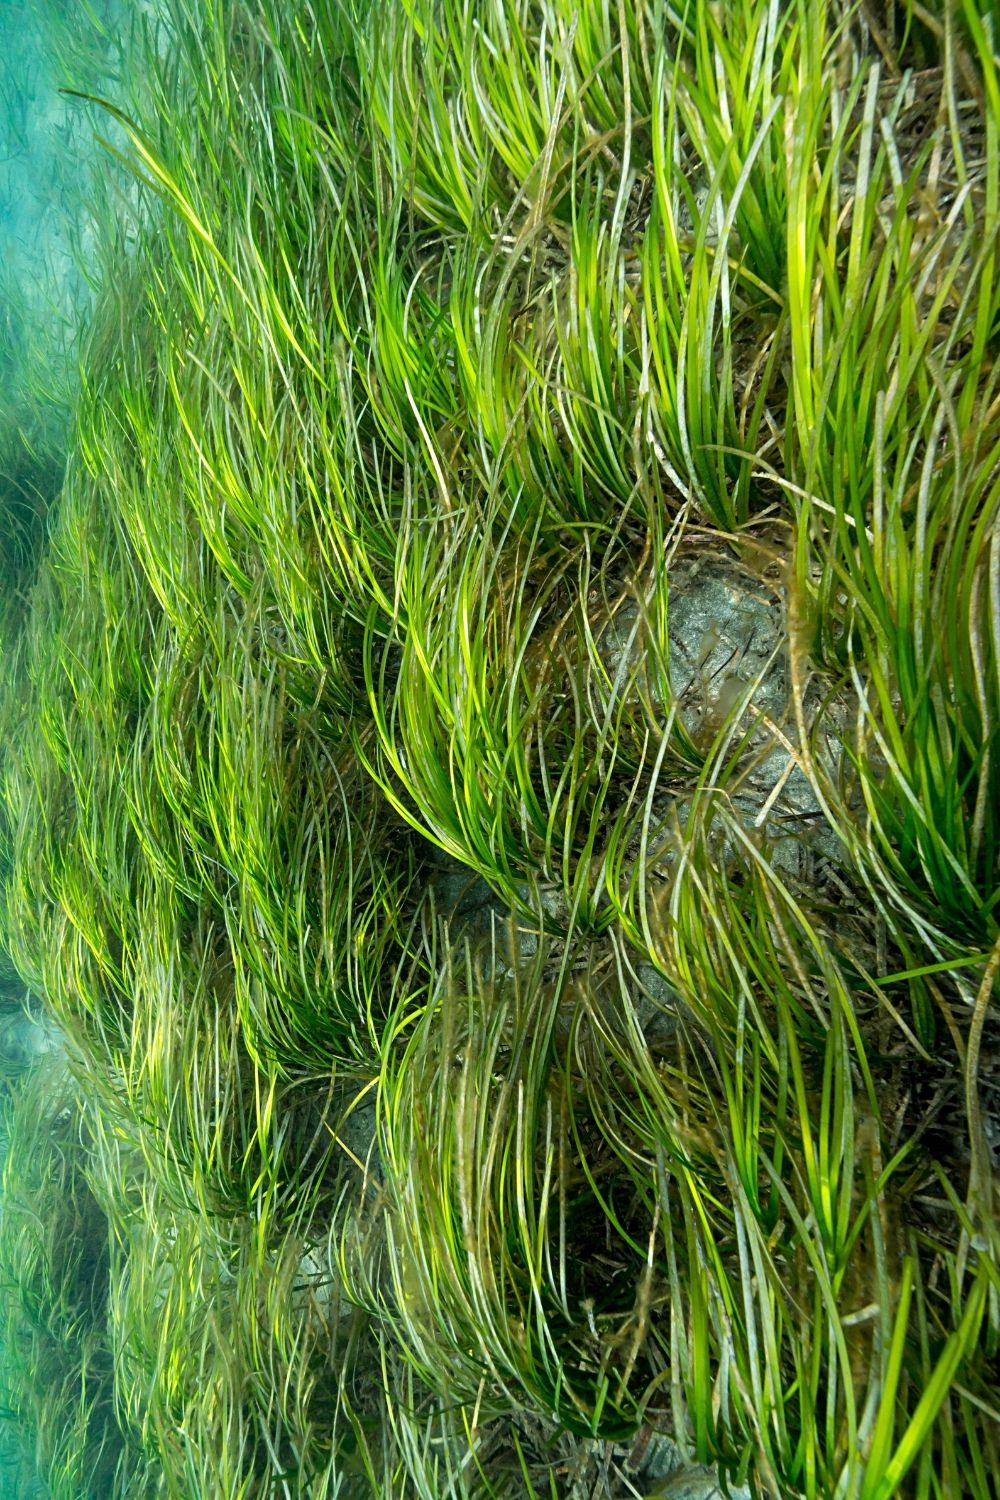 Eelgrass is one of the aquatic plants you'll commonly find in betta fish's tank